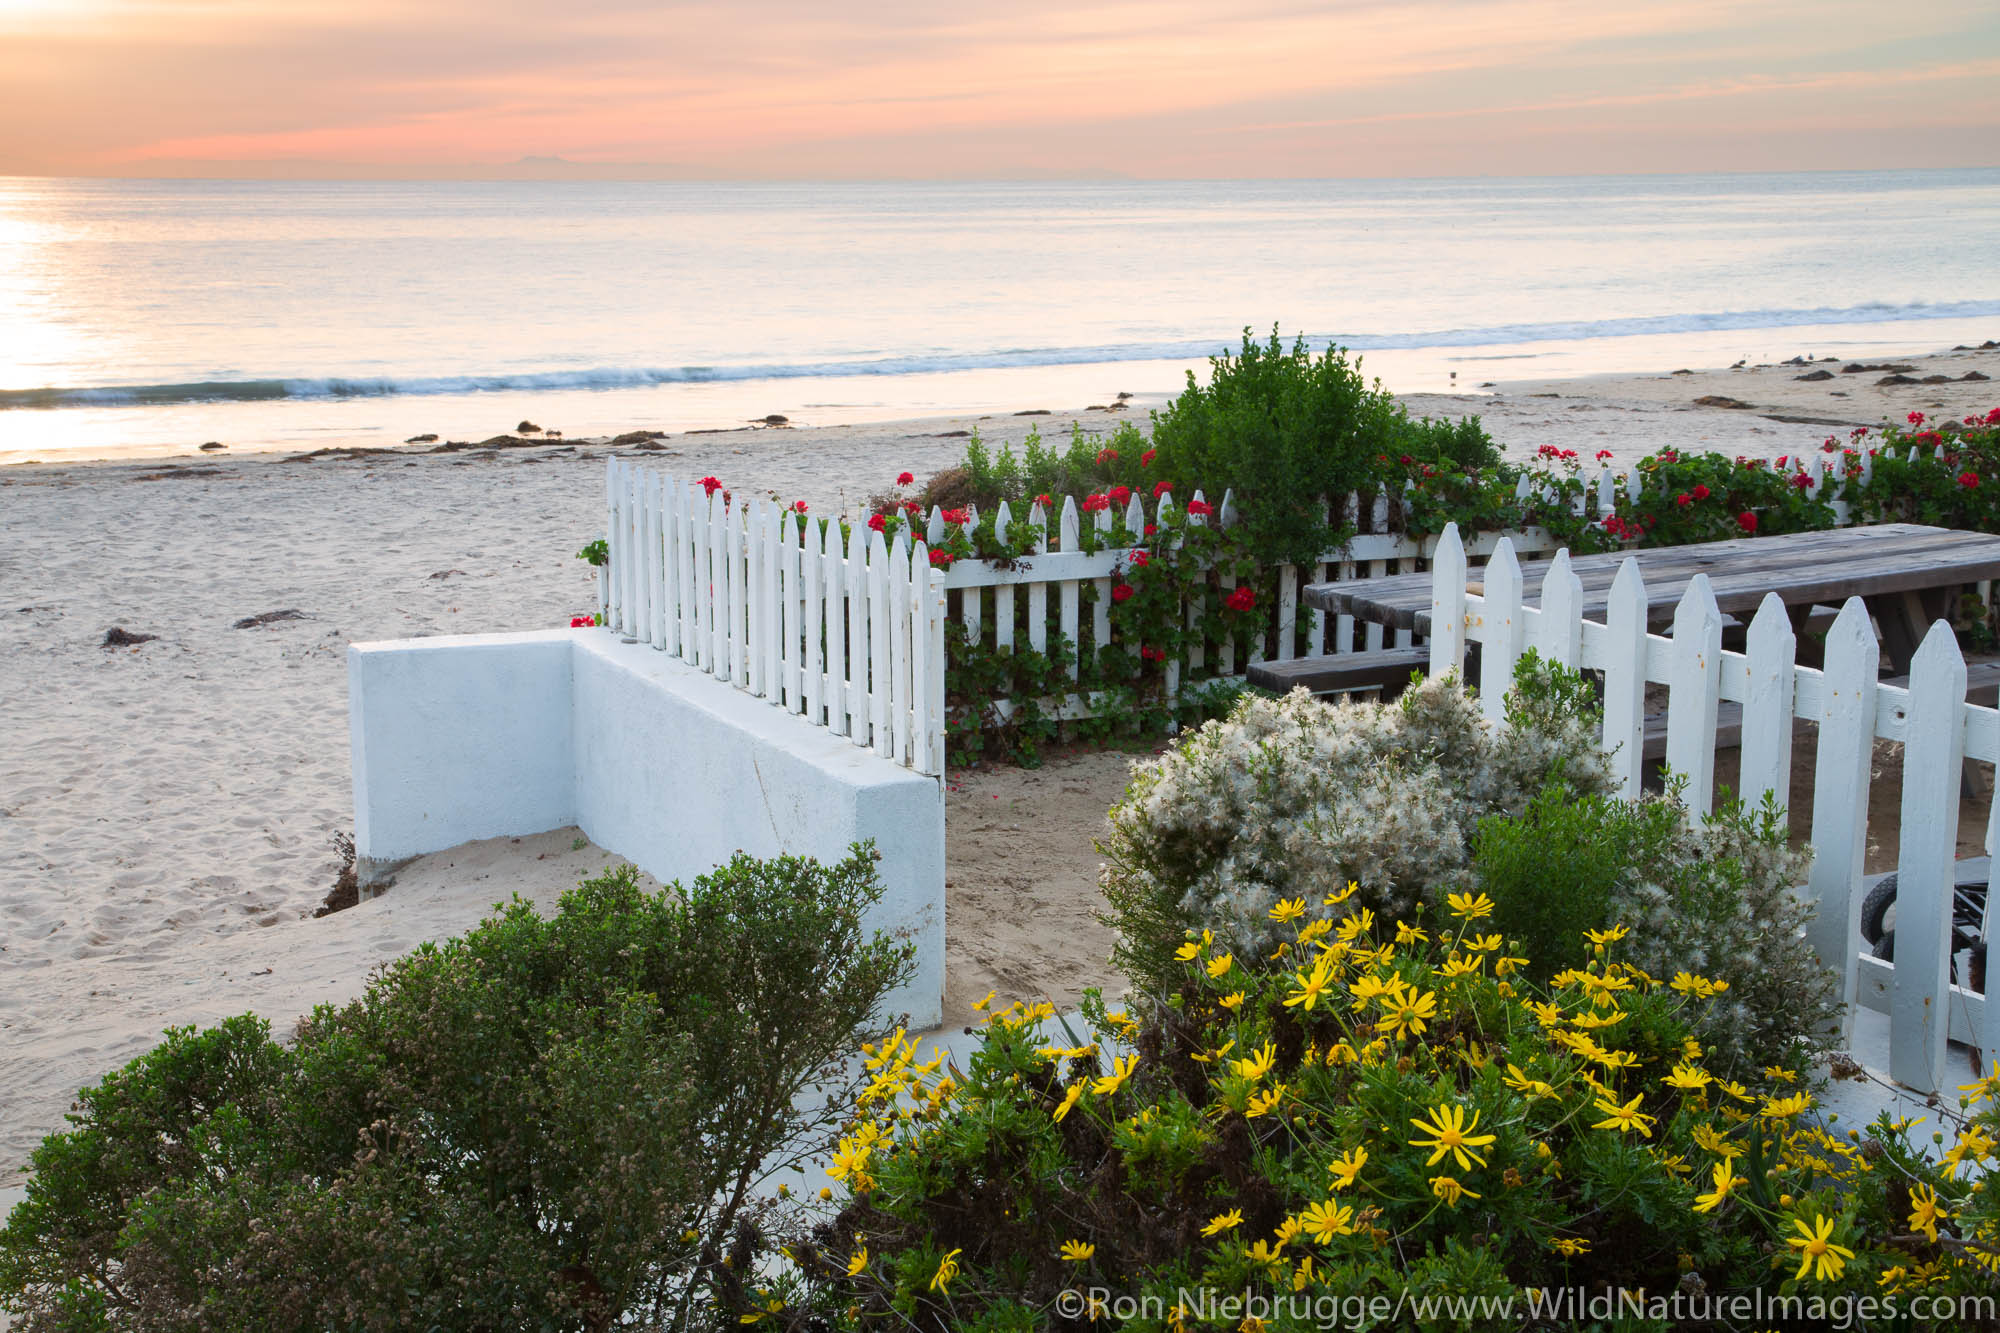 Crystal Cove Beach Cottages, Crystal Cove State Park, Newport Beach, Orange County, California.